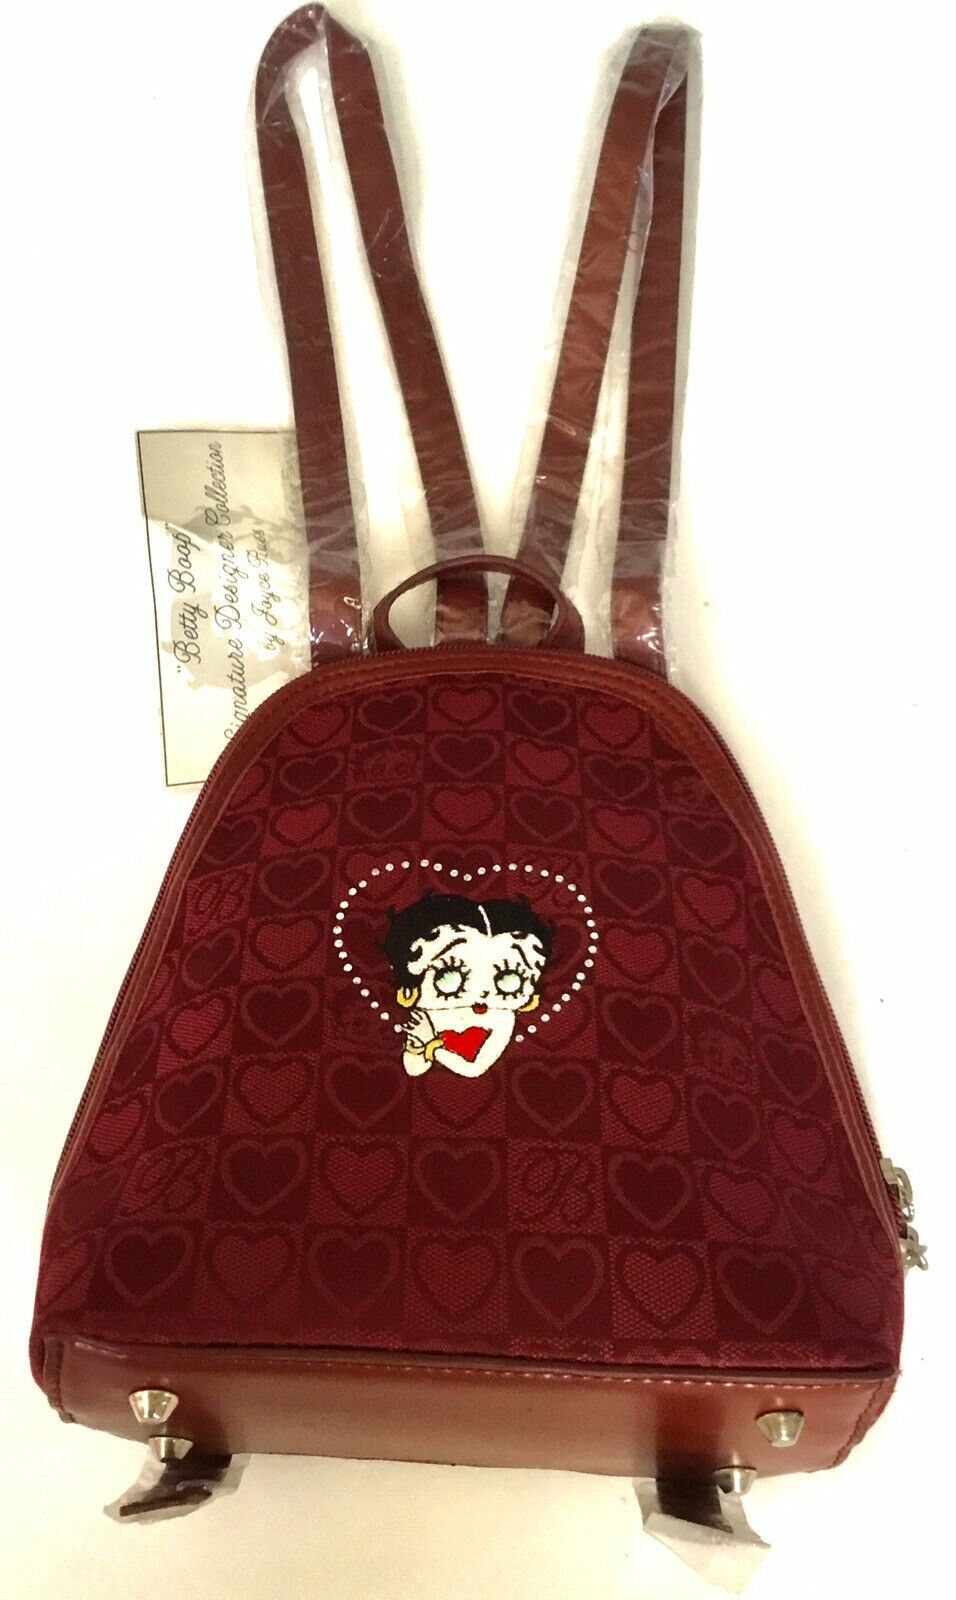 BETTY BOOP OFFICIALLY LICENCED RACKSACK BAG